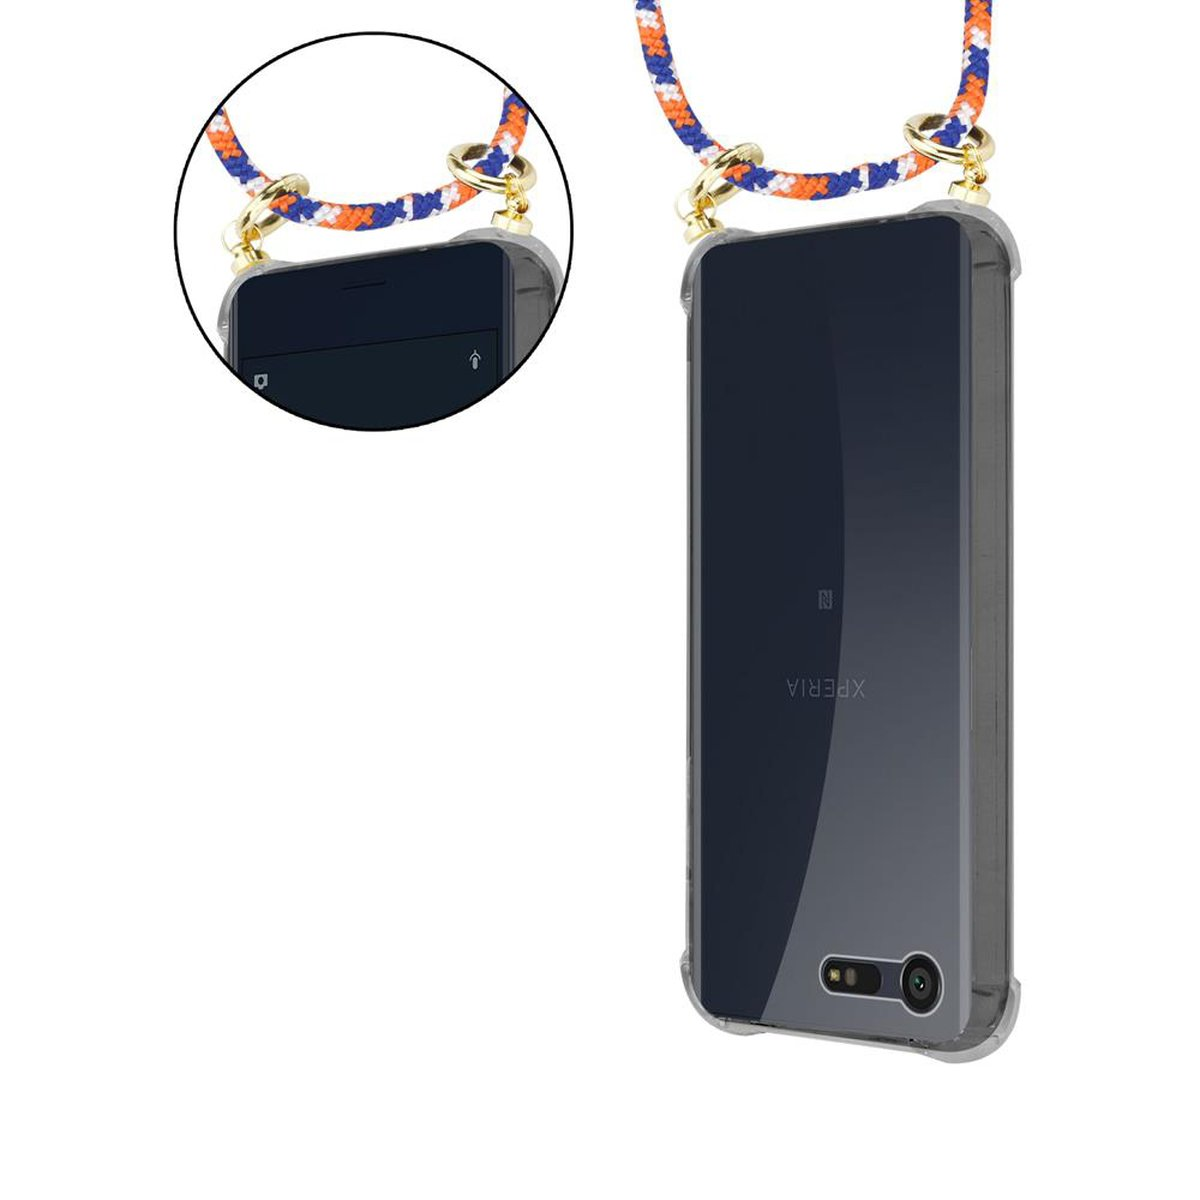 Kordel abnehmbarer Ringen, mit Gold Backcover, Handy ORANGE WEIß COMPACT, und BLAU X Hülle, CADORABO Band Sony, Kette Xperia